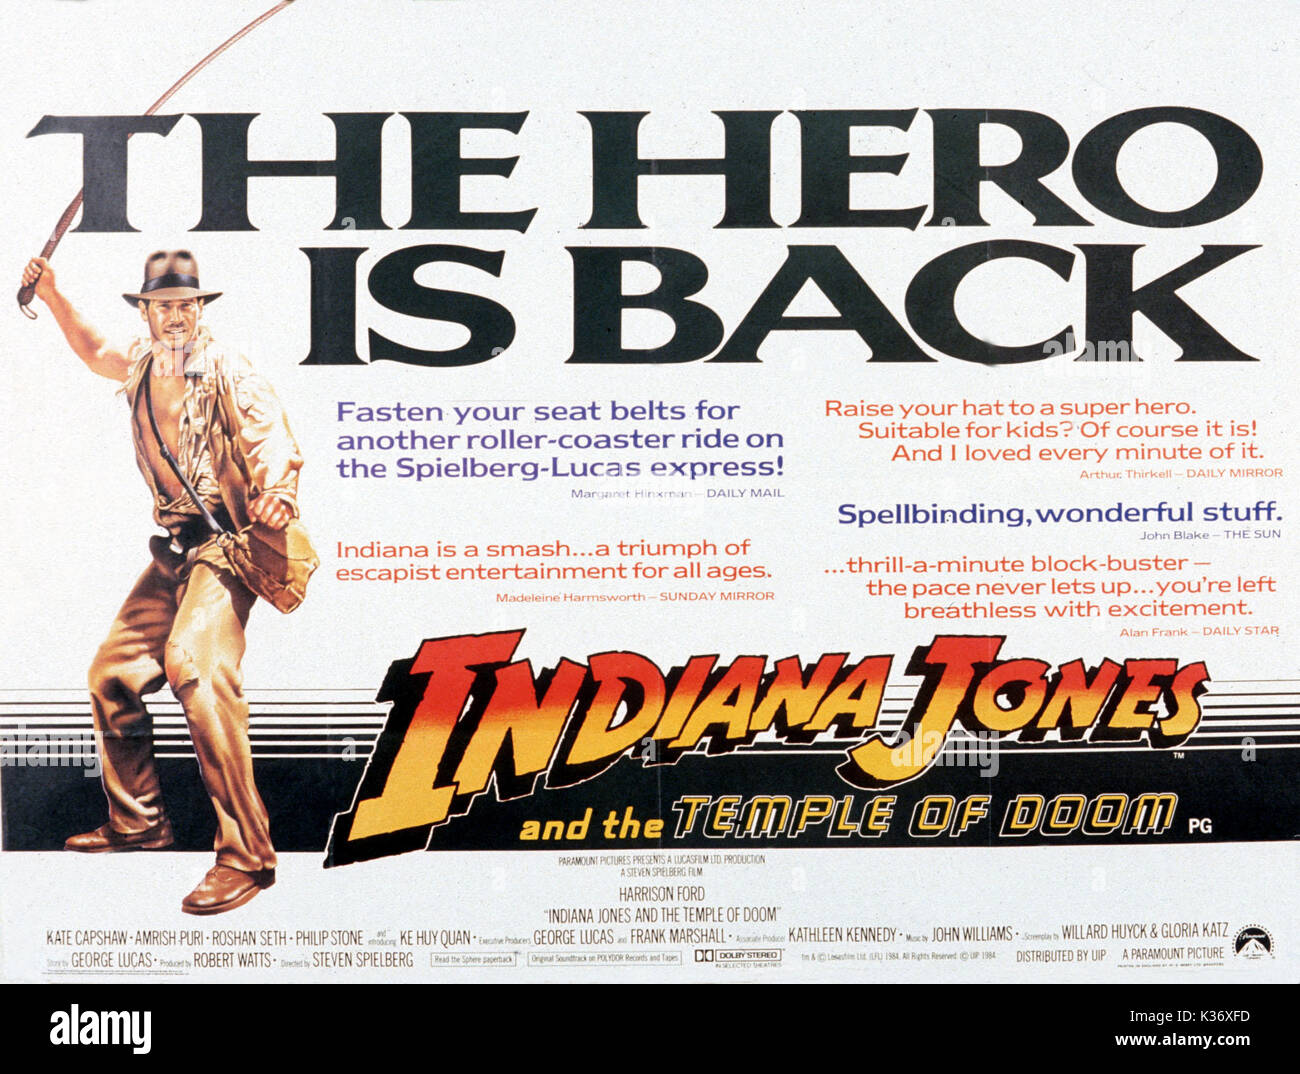 INDIANA JONES & THE TEMPLE OF DOOM LUCASFILMS/PARAMOUNT PICTURES     Date: 1984 Stock Photo